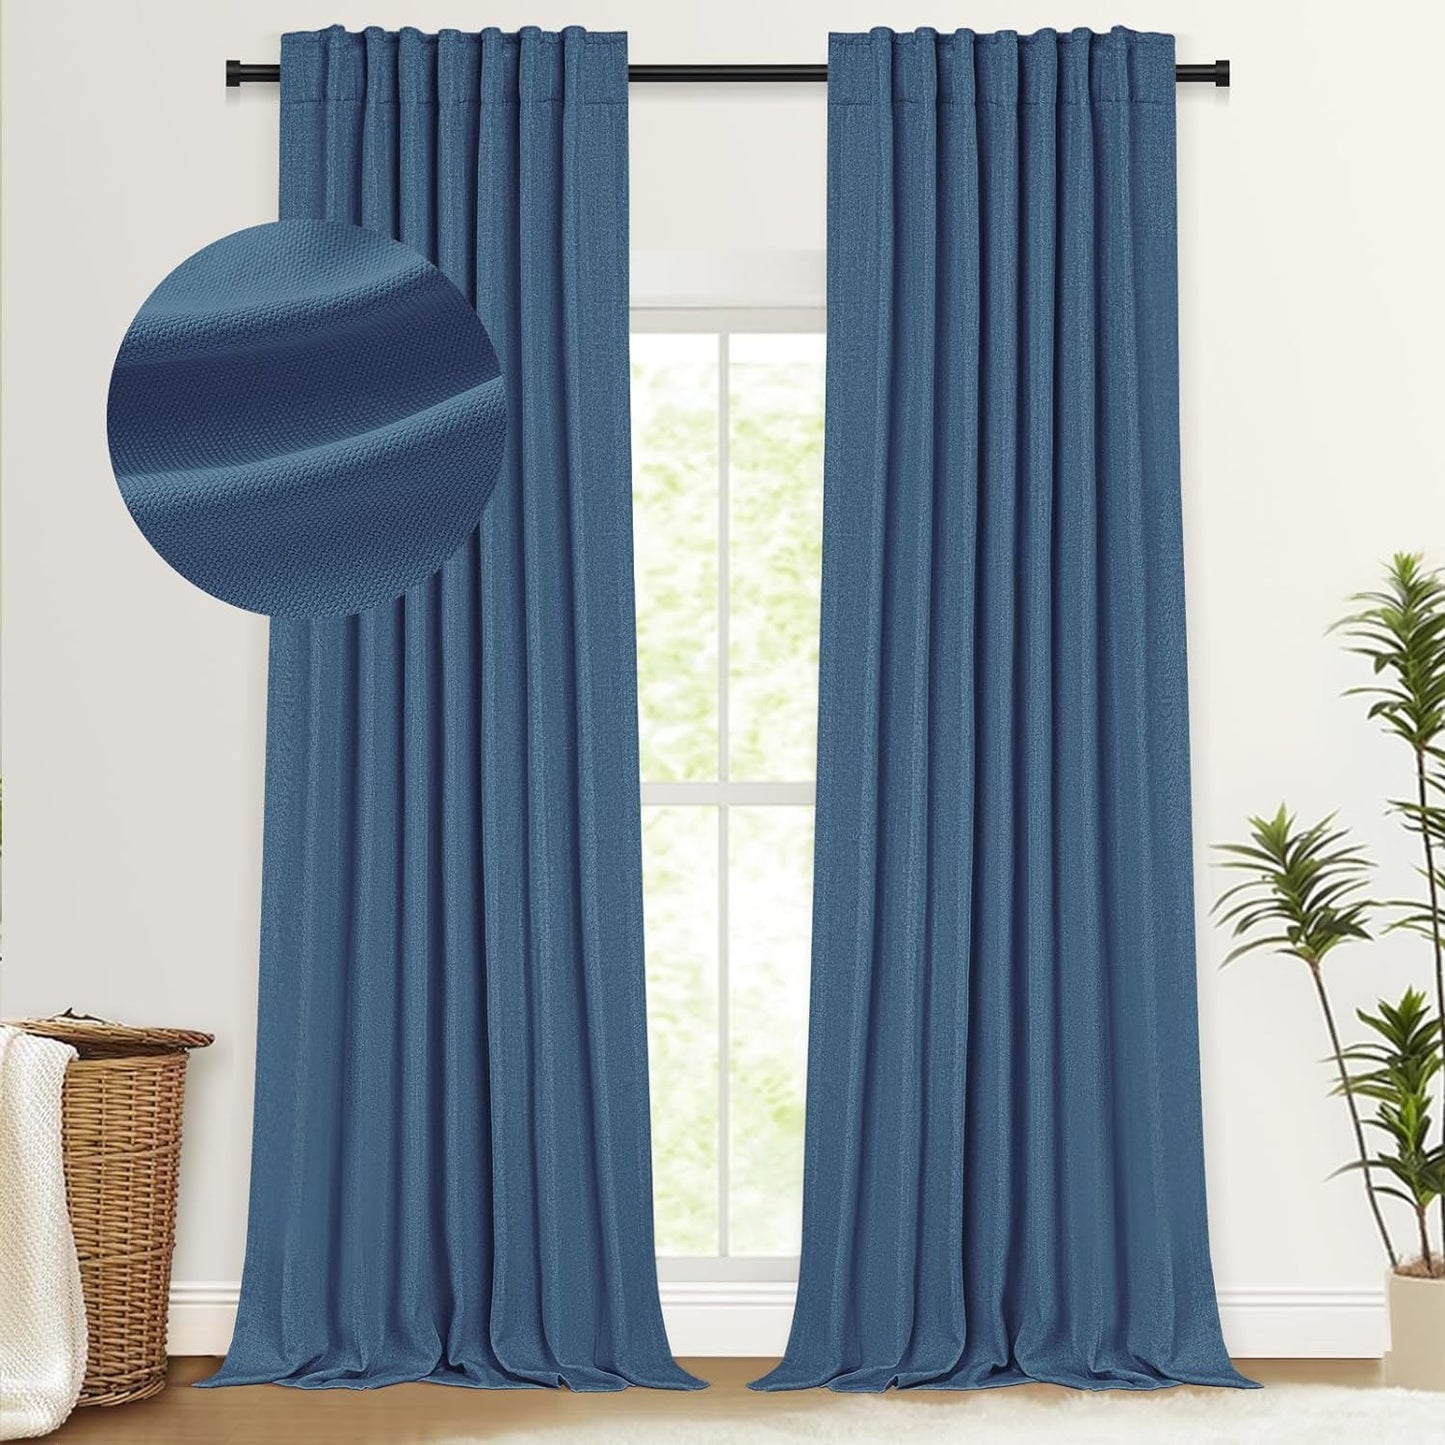 100% Blackout Shield Faux Linen Blackout Curtains for Bedroom 84 Inch Length 2 Panels Set, Cream Curtains with Back Tab/Rod Pocket, Thermal Insulated Drapes for Living Room, 50" W X 84" L, Cream  100% Blackout Shield Denim 50''W X 96''L 